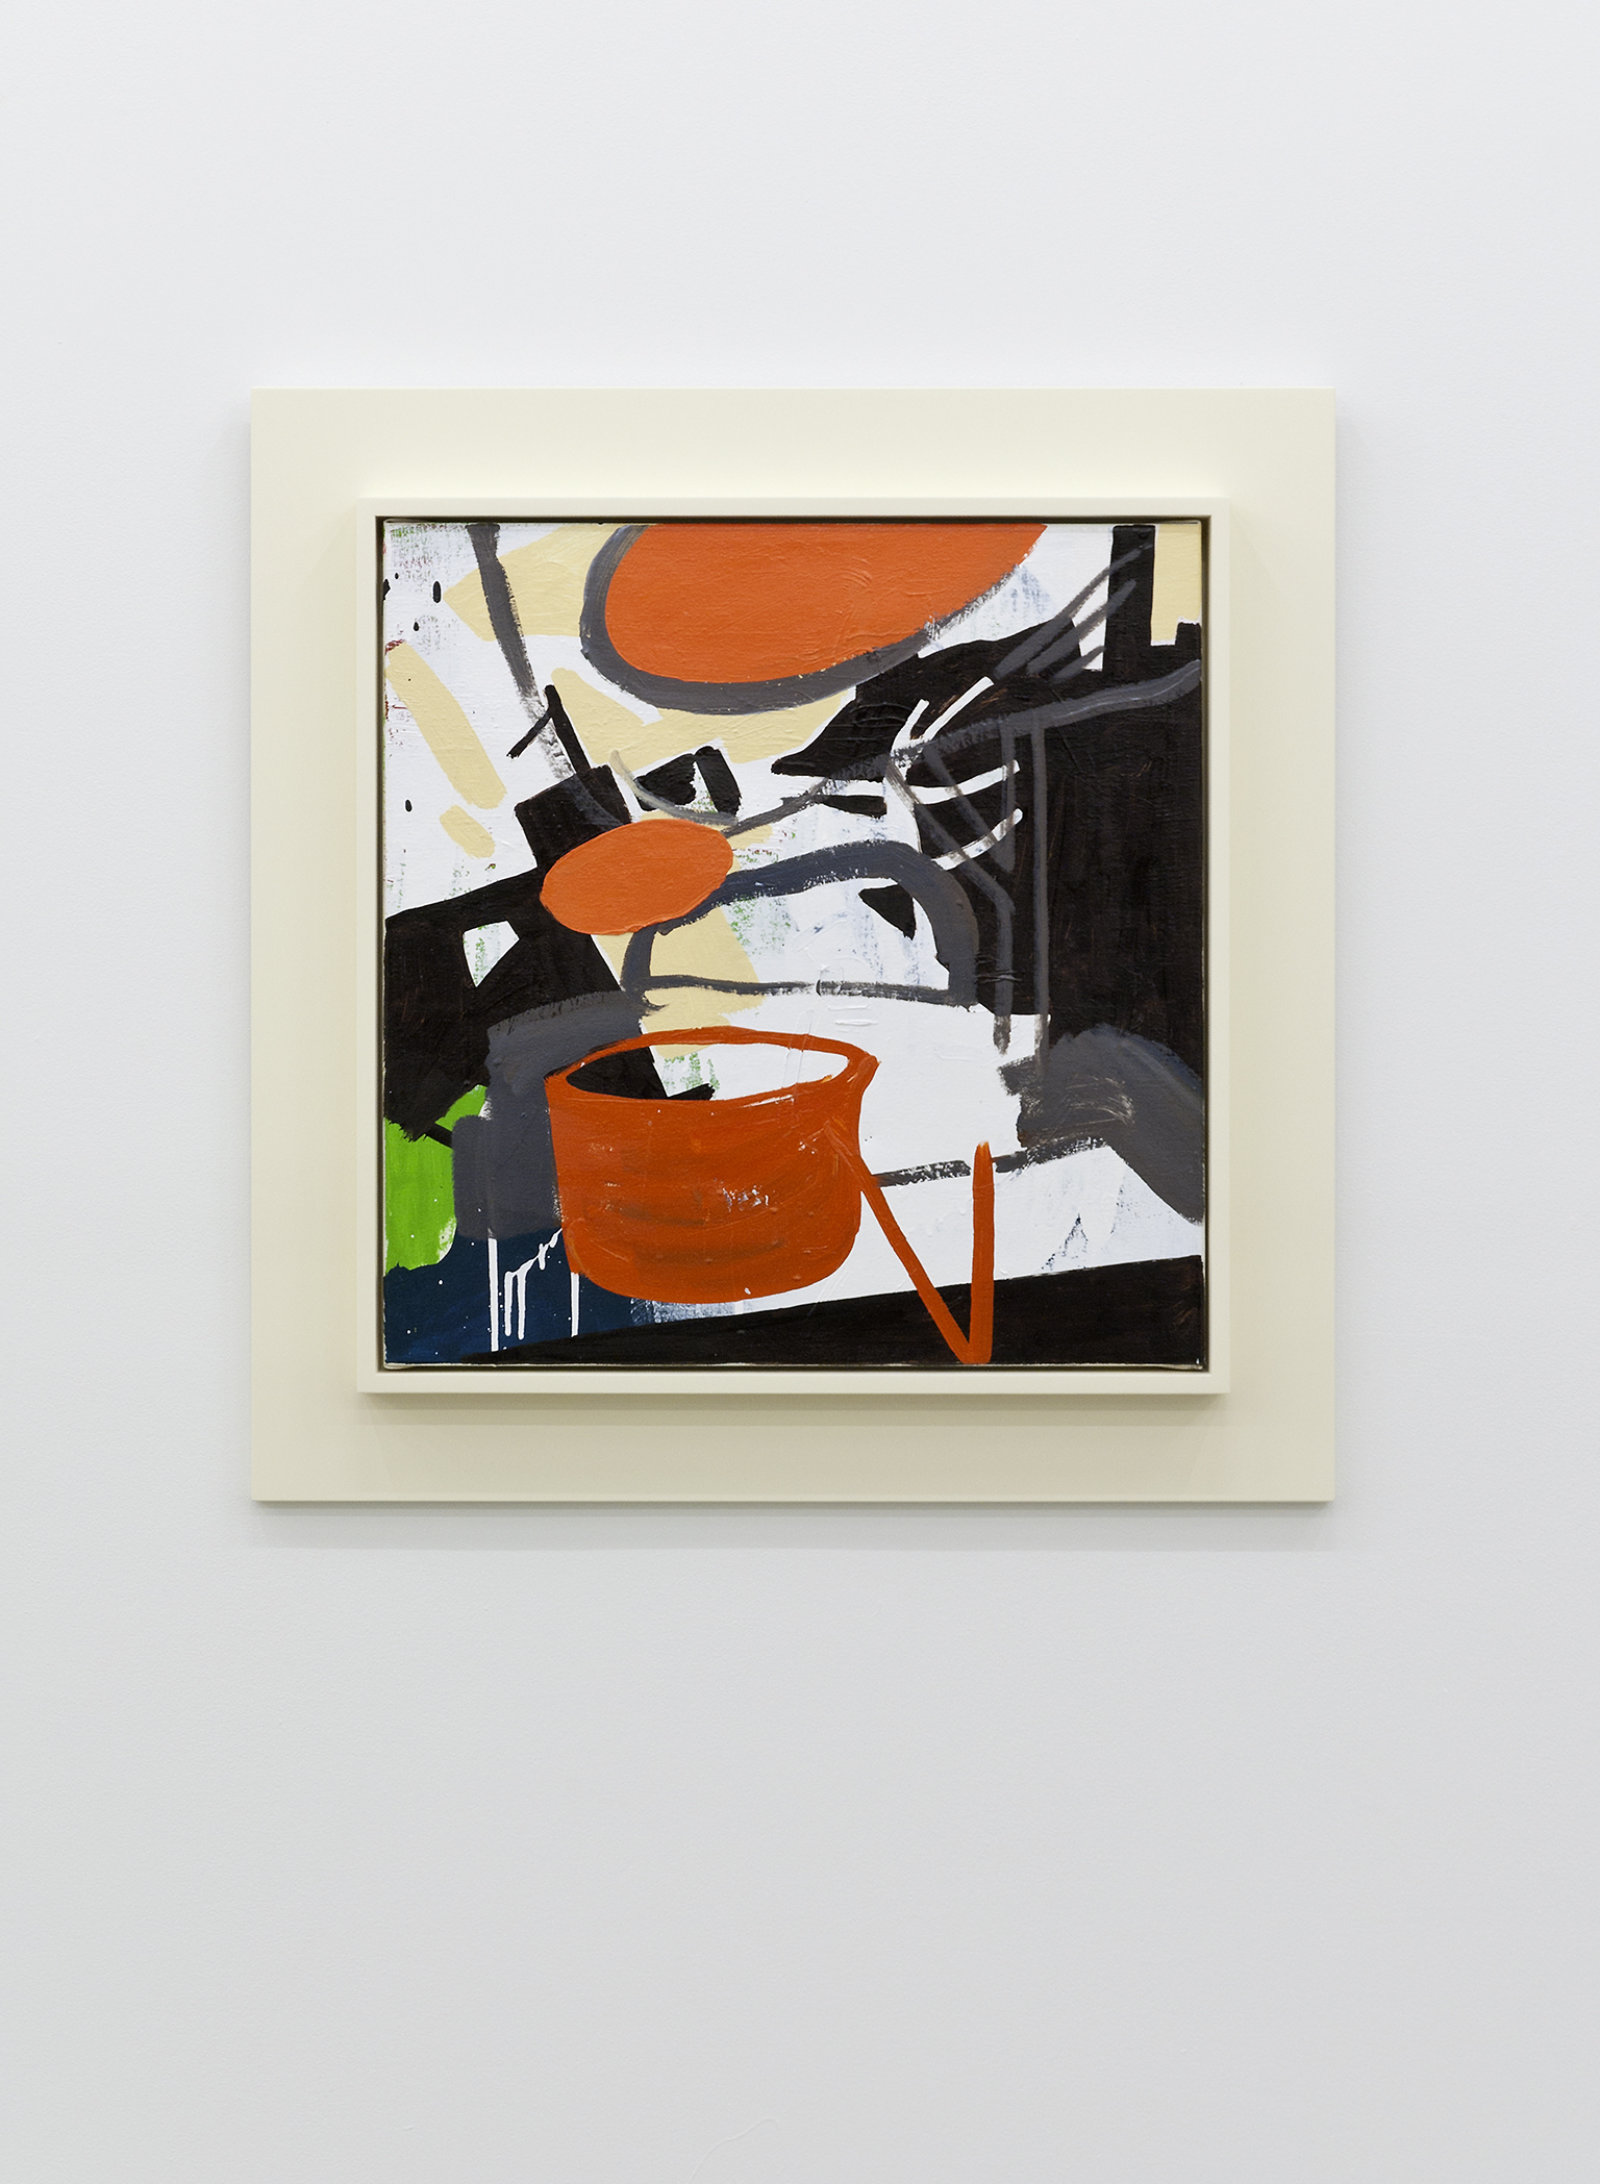 Damian Moppett, Lights in Studio, 2010, oil and enamel on linen and wood frame, 30 x 30 in. (75 x 75 cm)